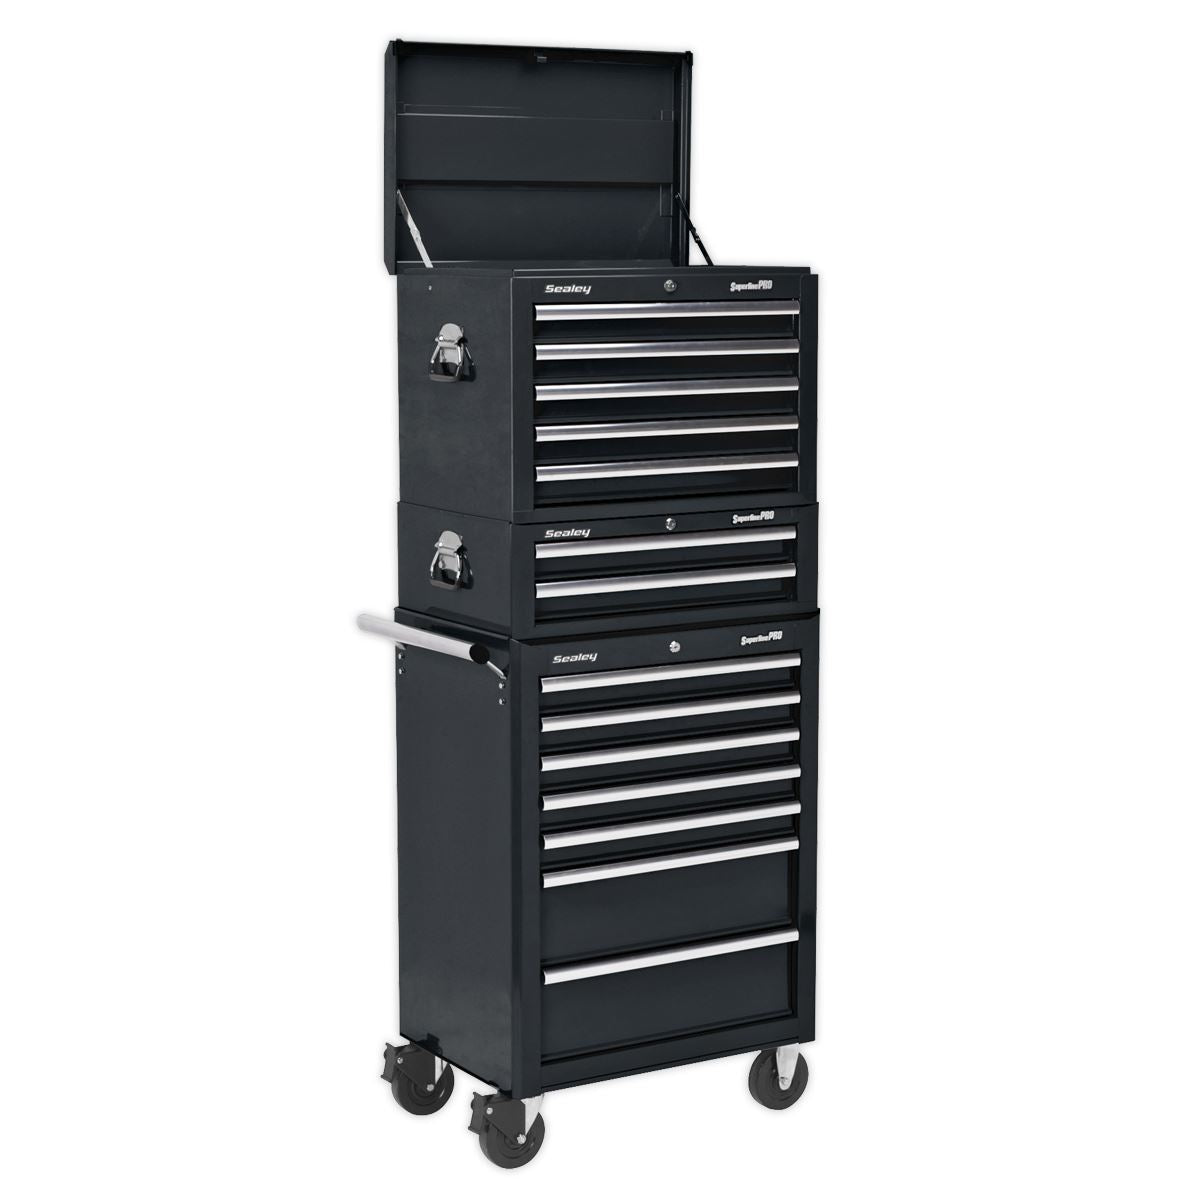 Sealey Superline Pro Topchest, Mid-Box Tool Chest & Rollcab Combination 14 Drawer with Ball-Bearing Slides - Black